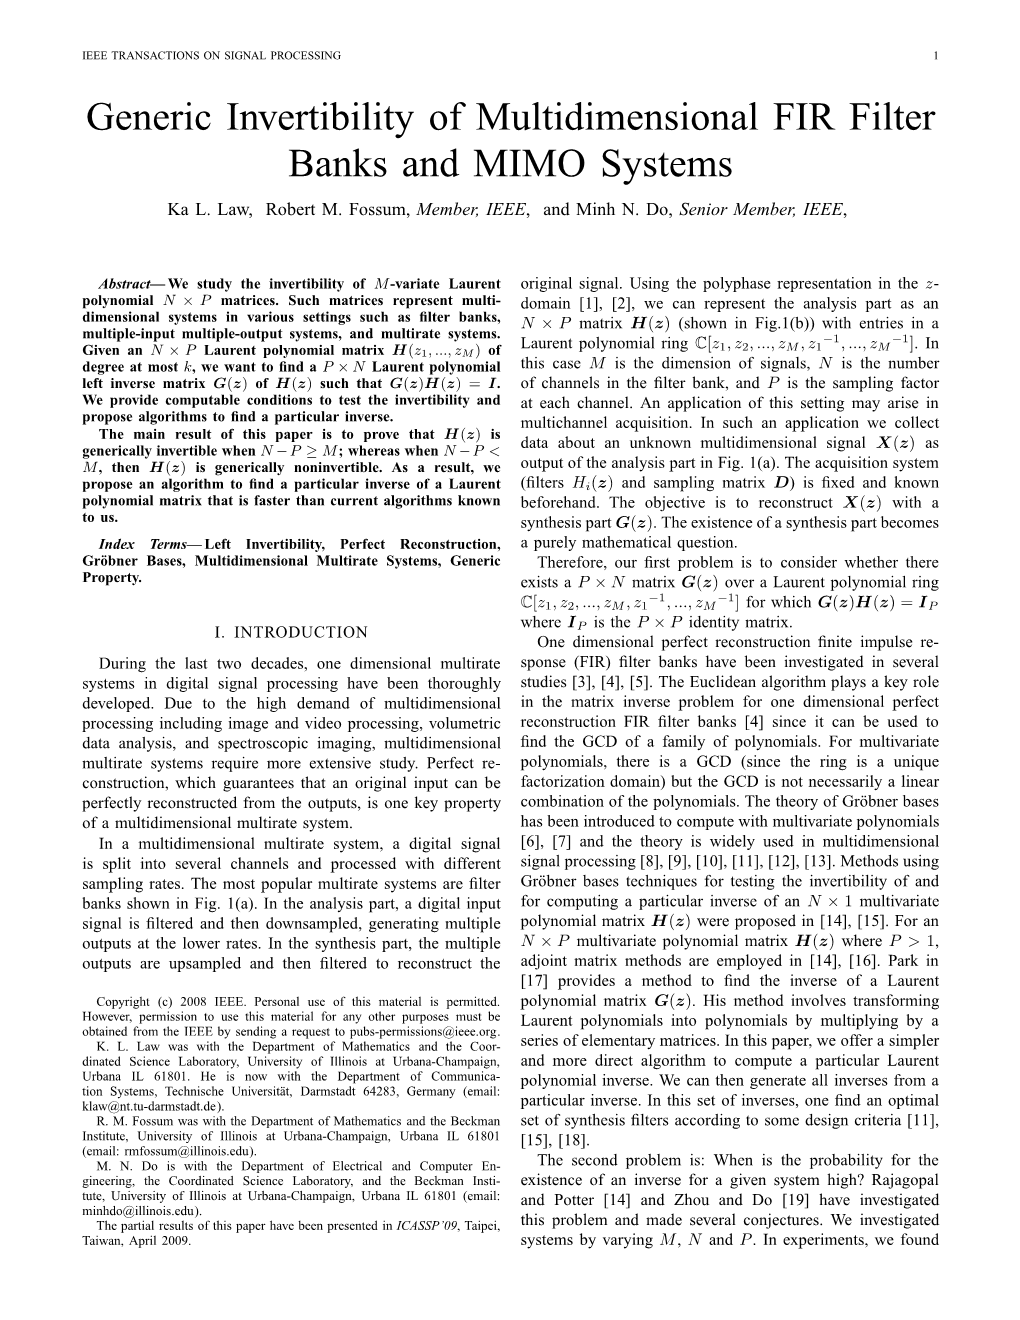 Generic Invertibility of Multidimensional FIR Filter Banks and MIMO Systems Ka L